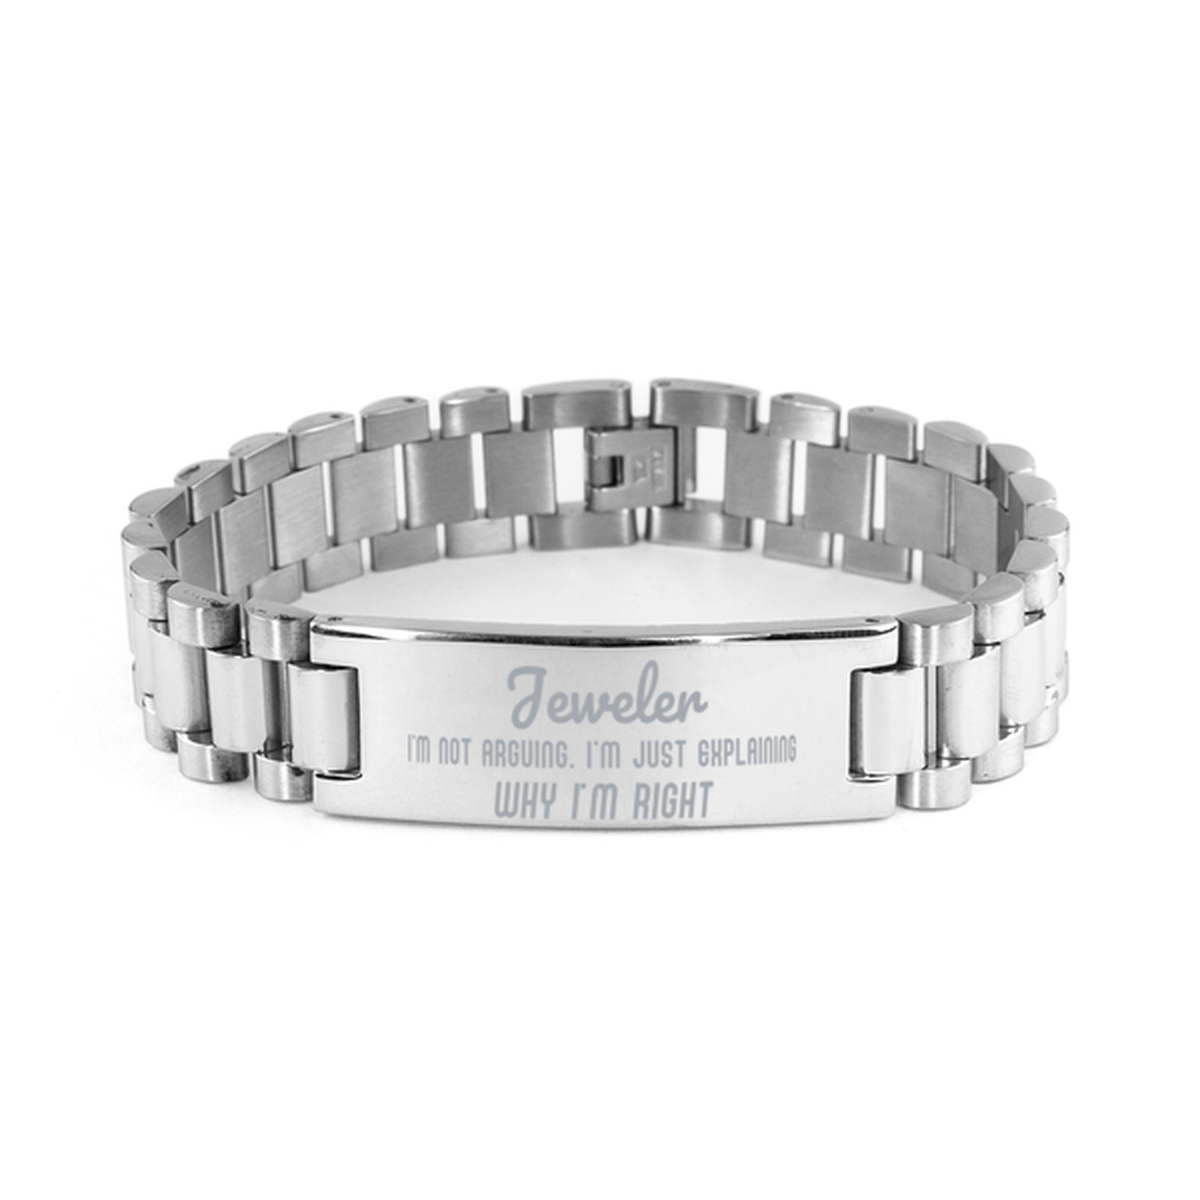 Jeweler I'm not Arguing. I'm Just Explaining Why I'm RIGHT Ladder Stainless Steel Bracelet, Graduation Birthday Christmas Jeweler Gifts For Jeweler Funny Saying Quote Present for Men Women Coworker